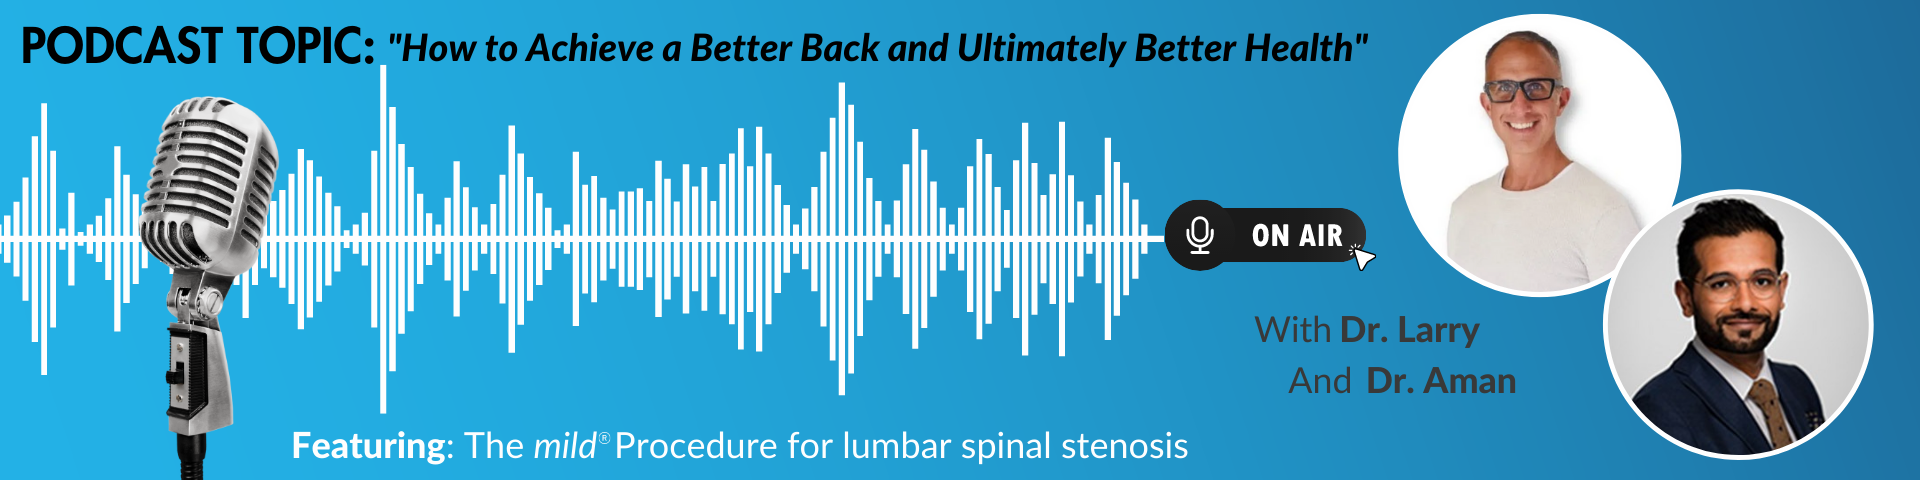 Podcast Topic: "How to Achieve a Better Back and Ultimately Better Health." On air with Dr. Larry and Dr. Aman. Featuring: The mild Procedure for lumbar spinal stenosis